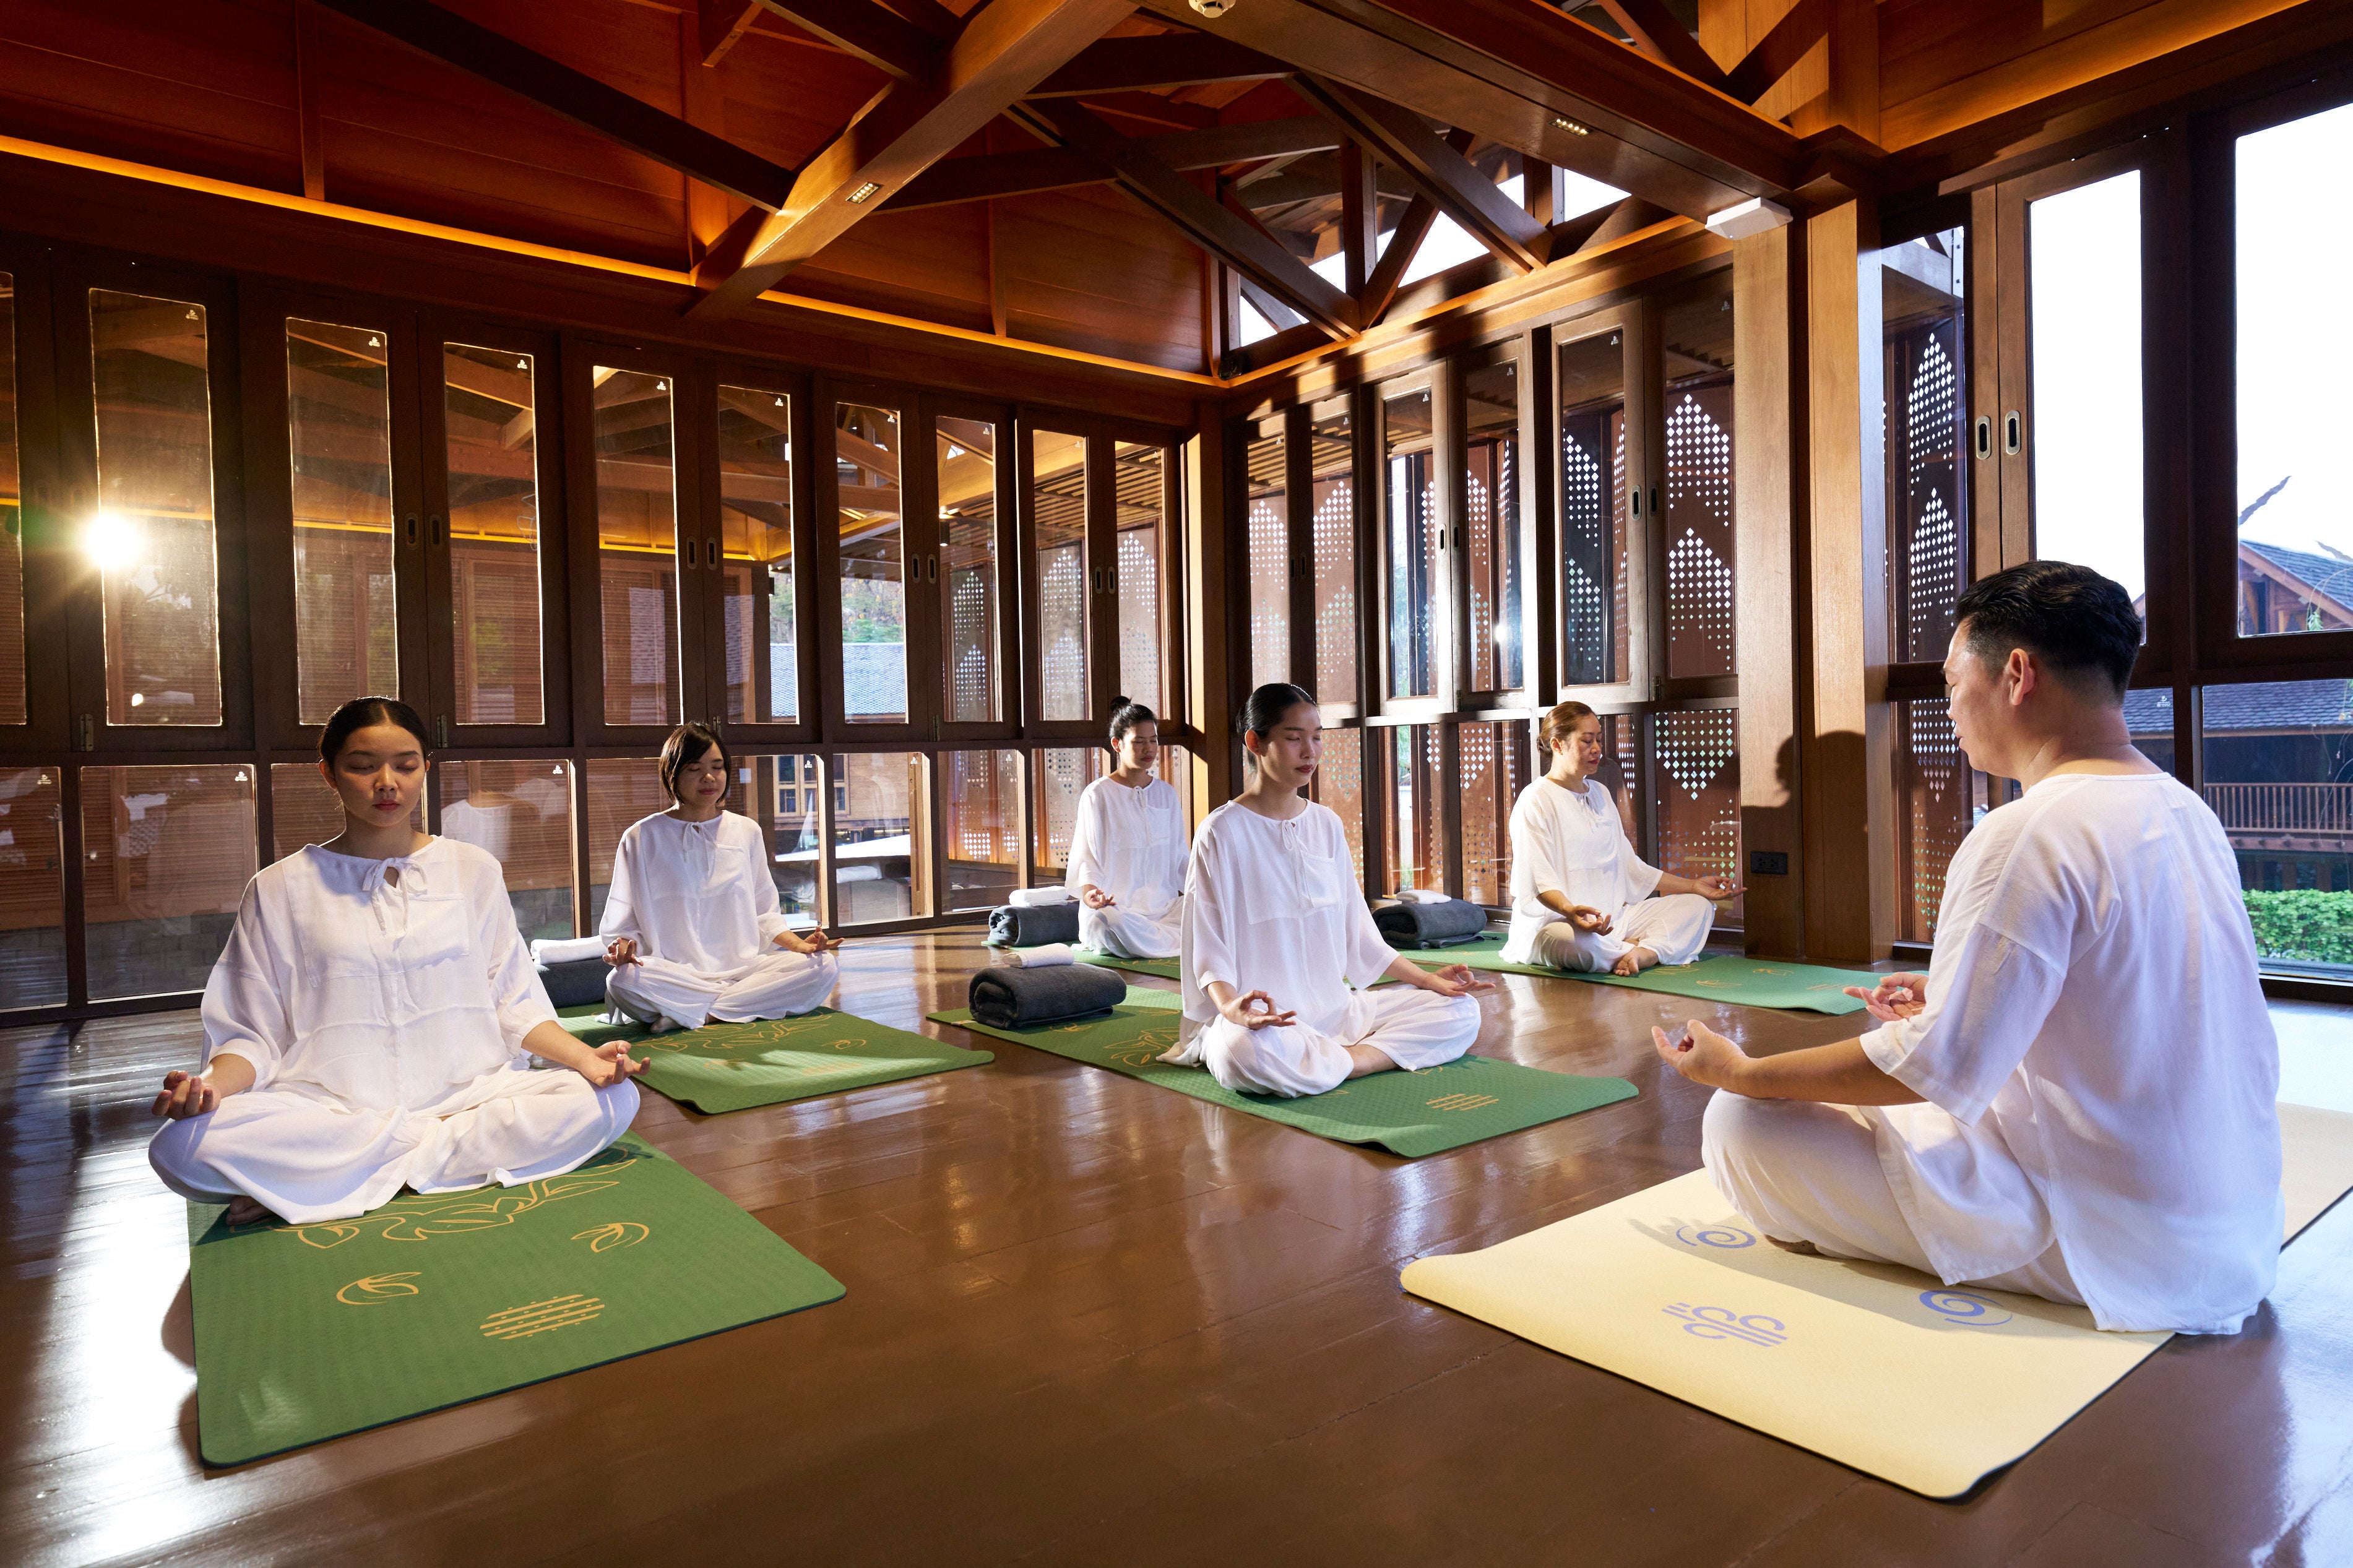 Silent retreats are made up of various activities